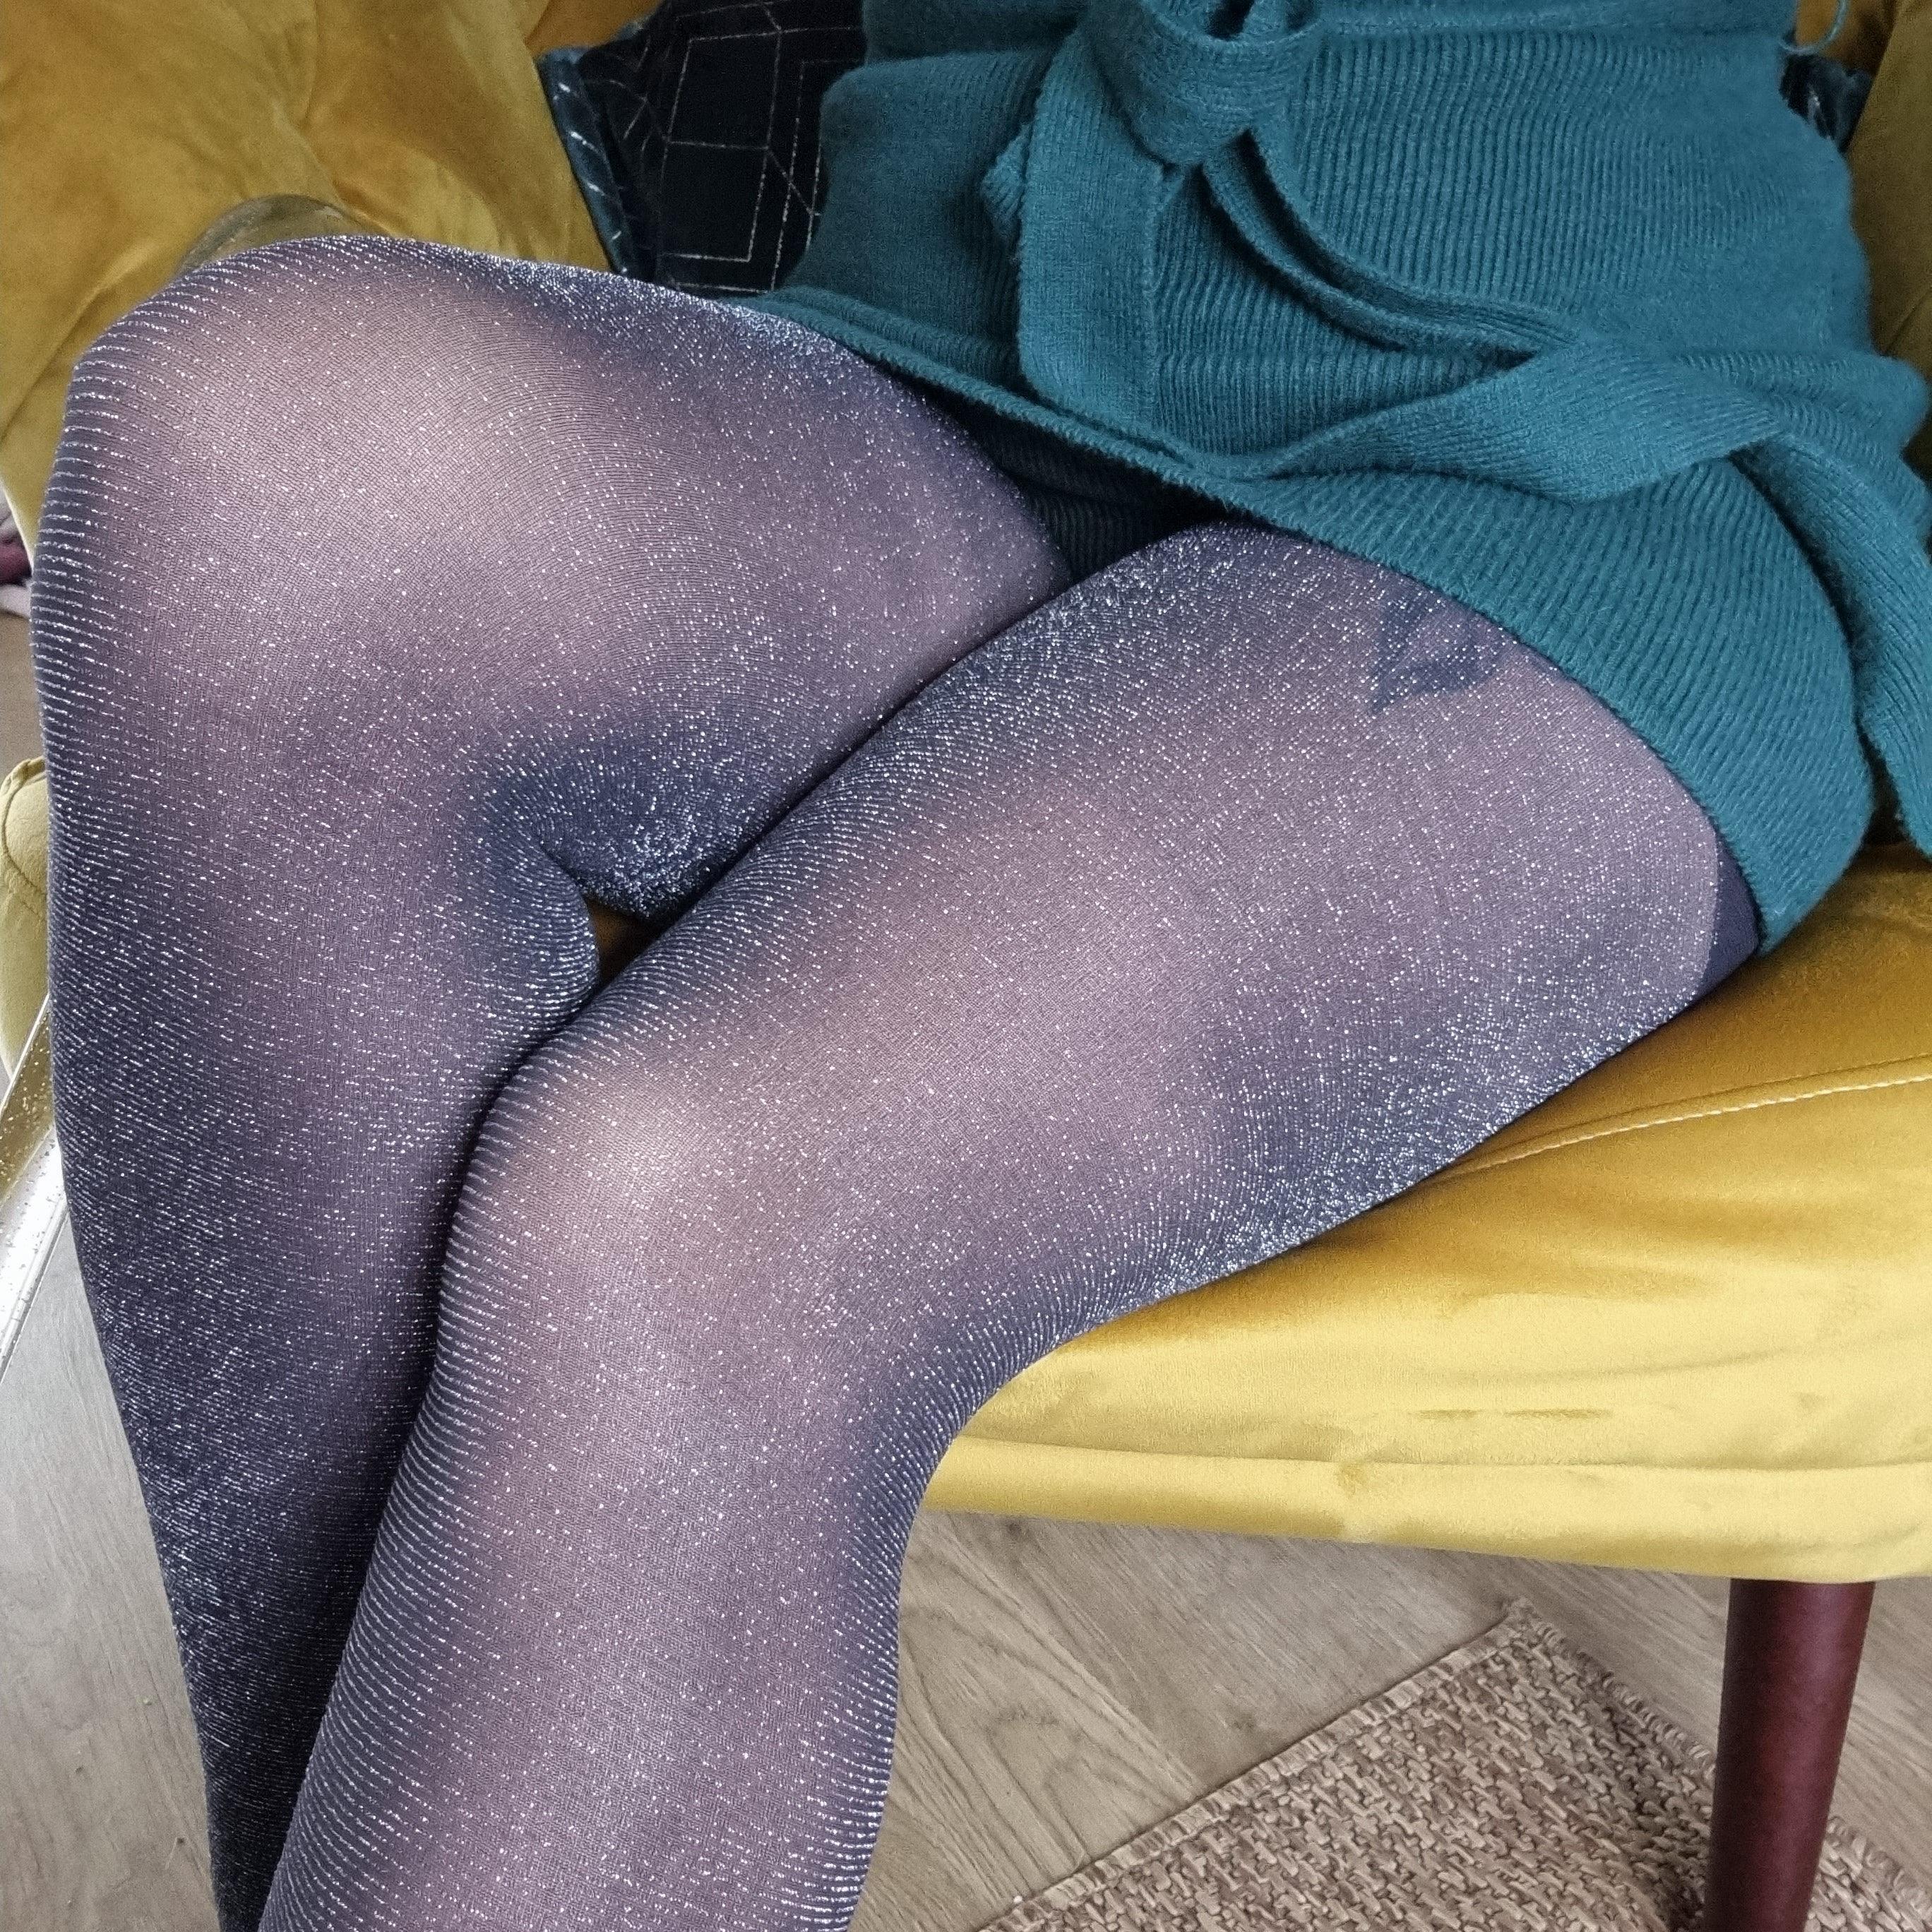 Buy Black Sparkle Tights from the Next UK online shop